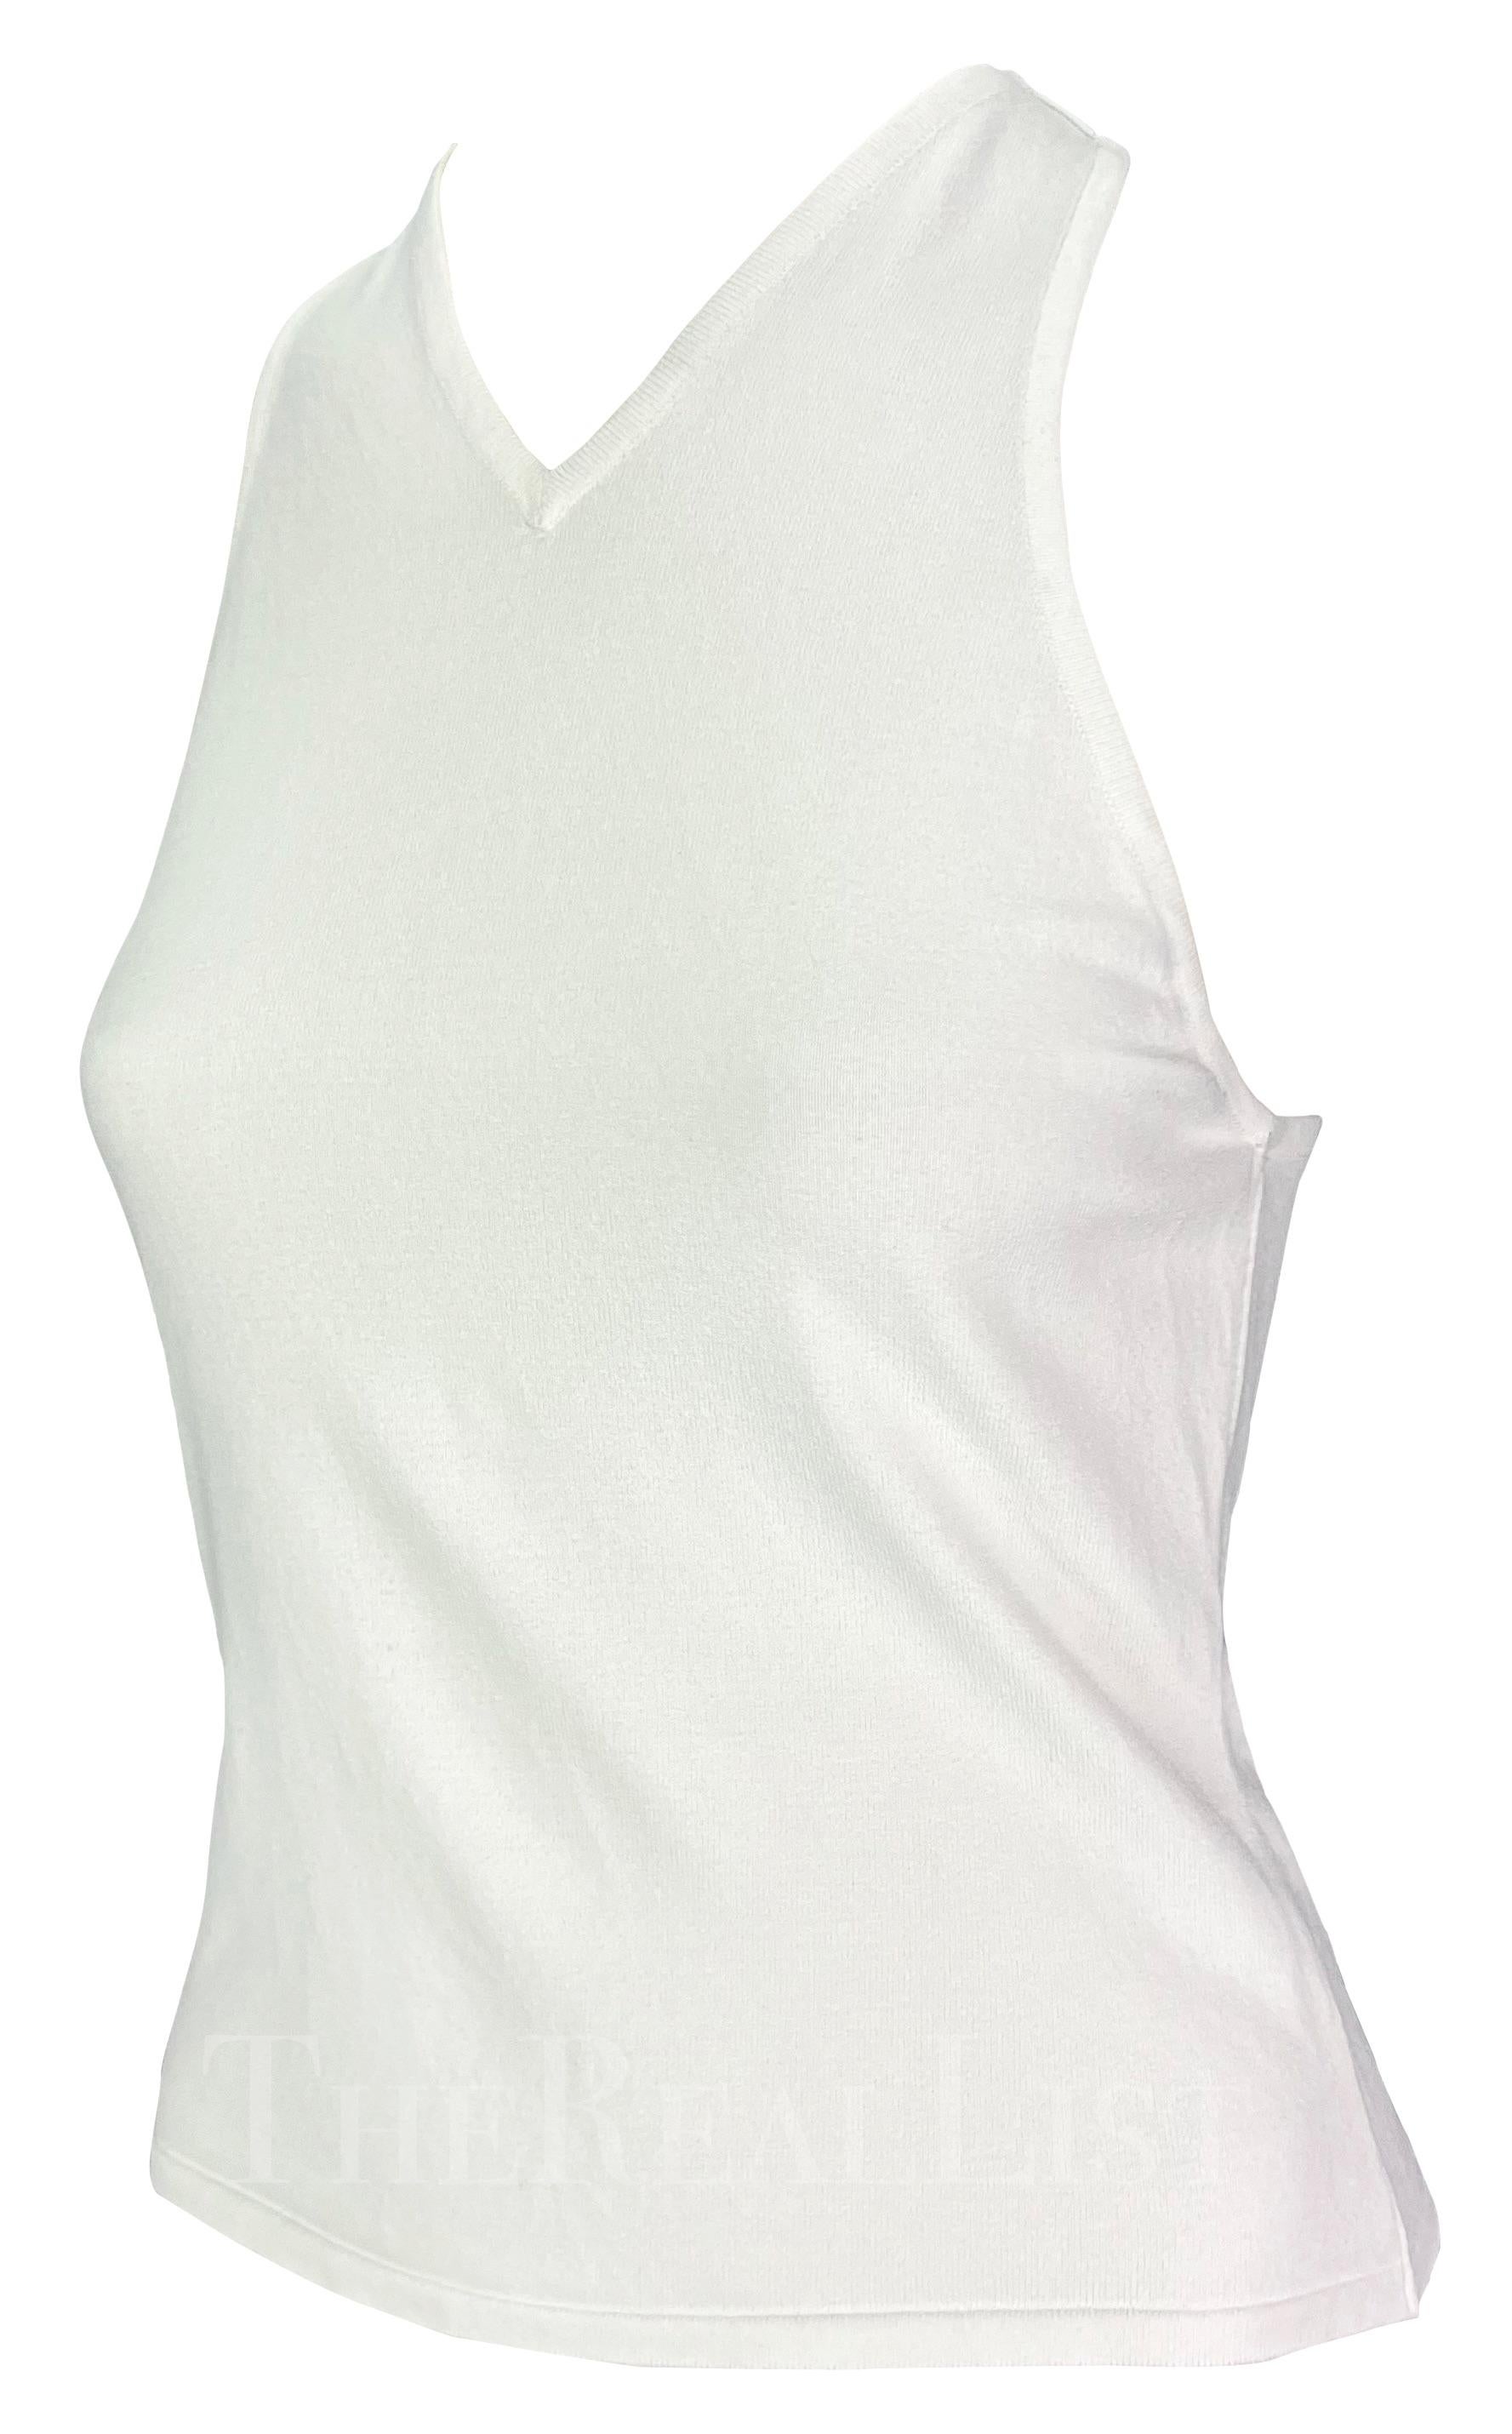 S/S 1998 Gucci by Tom Ford White Stretch Knit Racerback Tank Top en vente 2